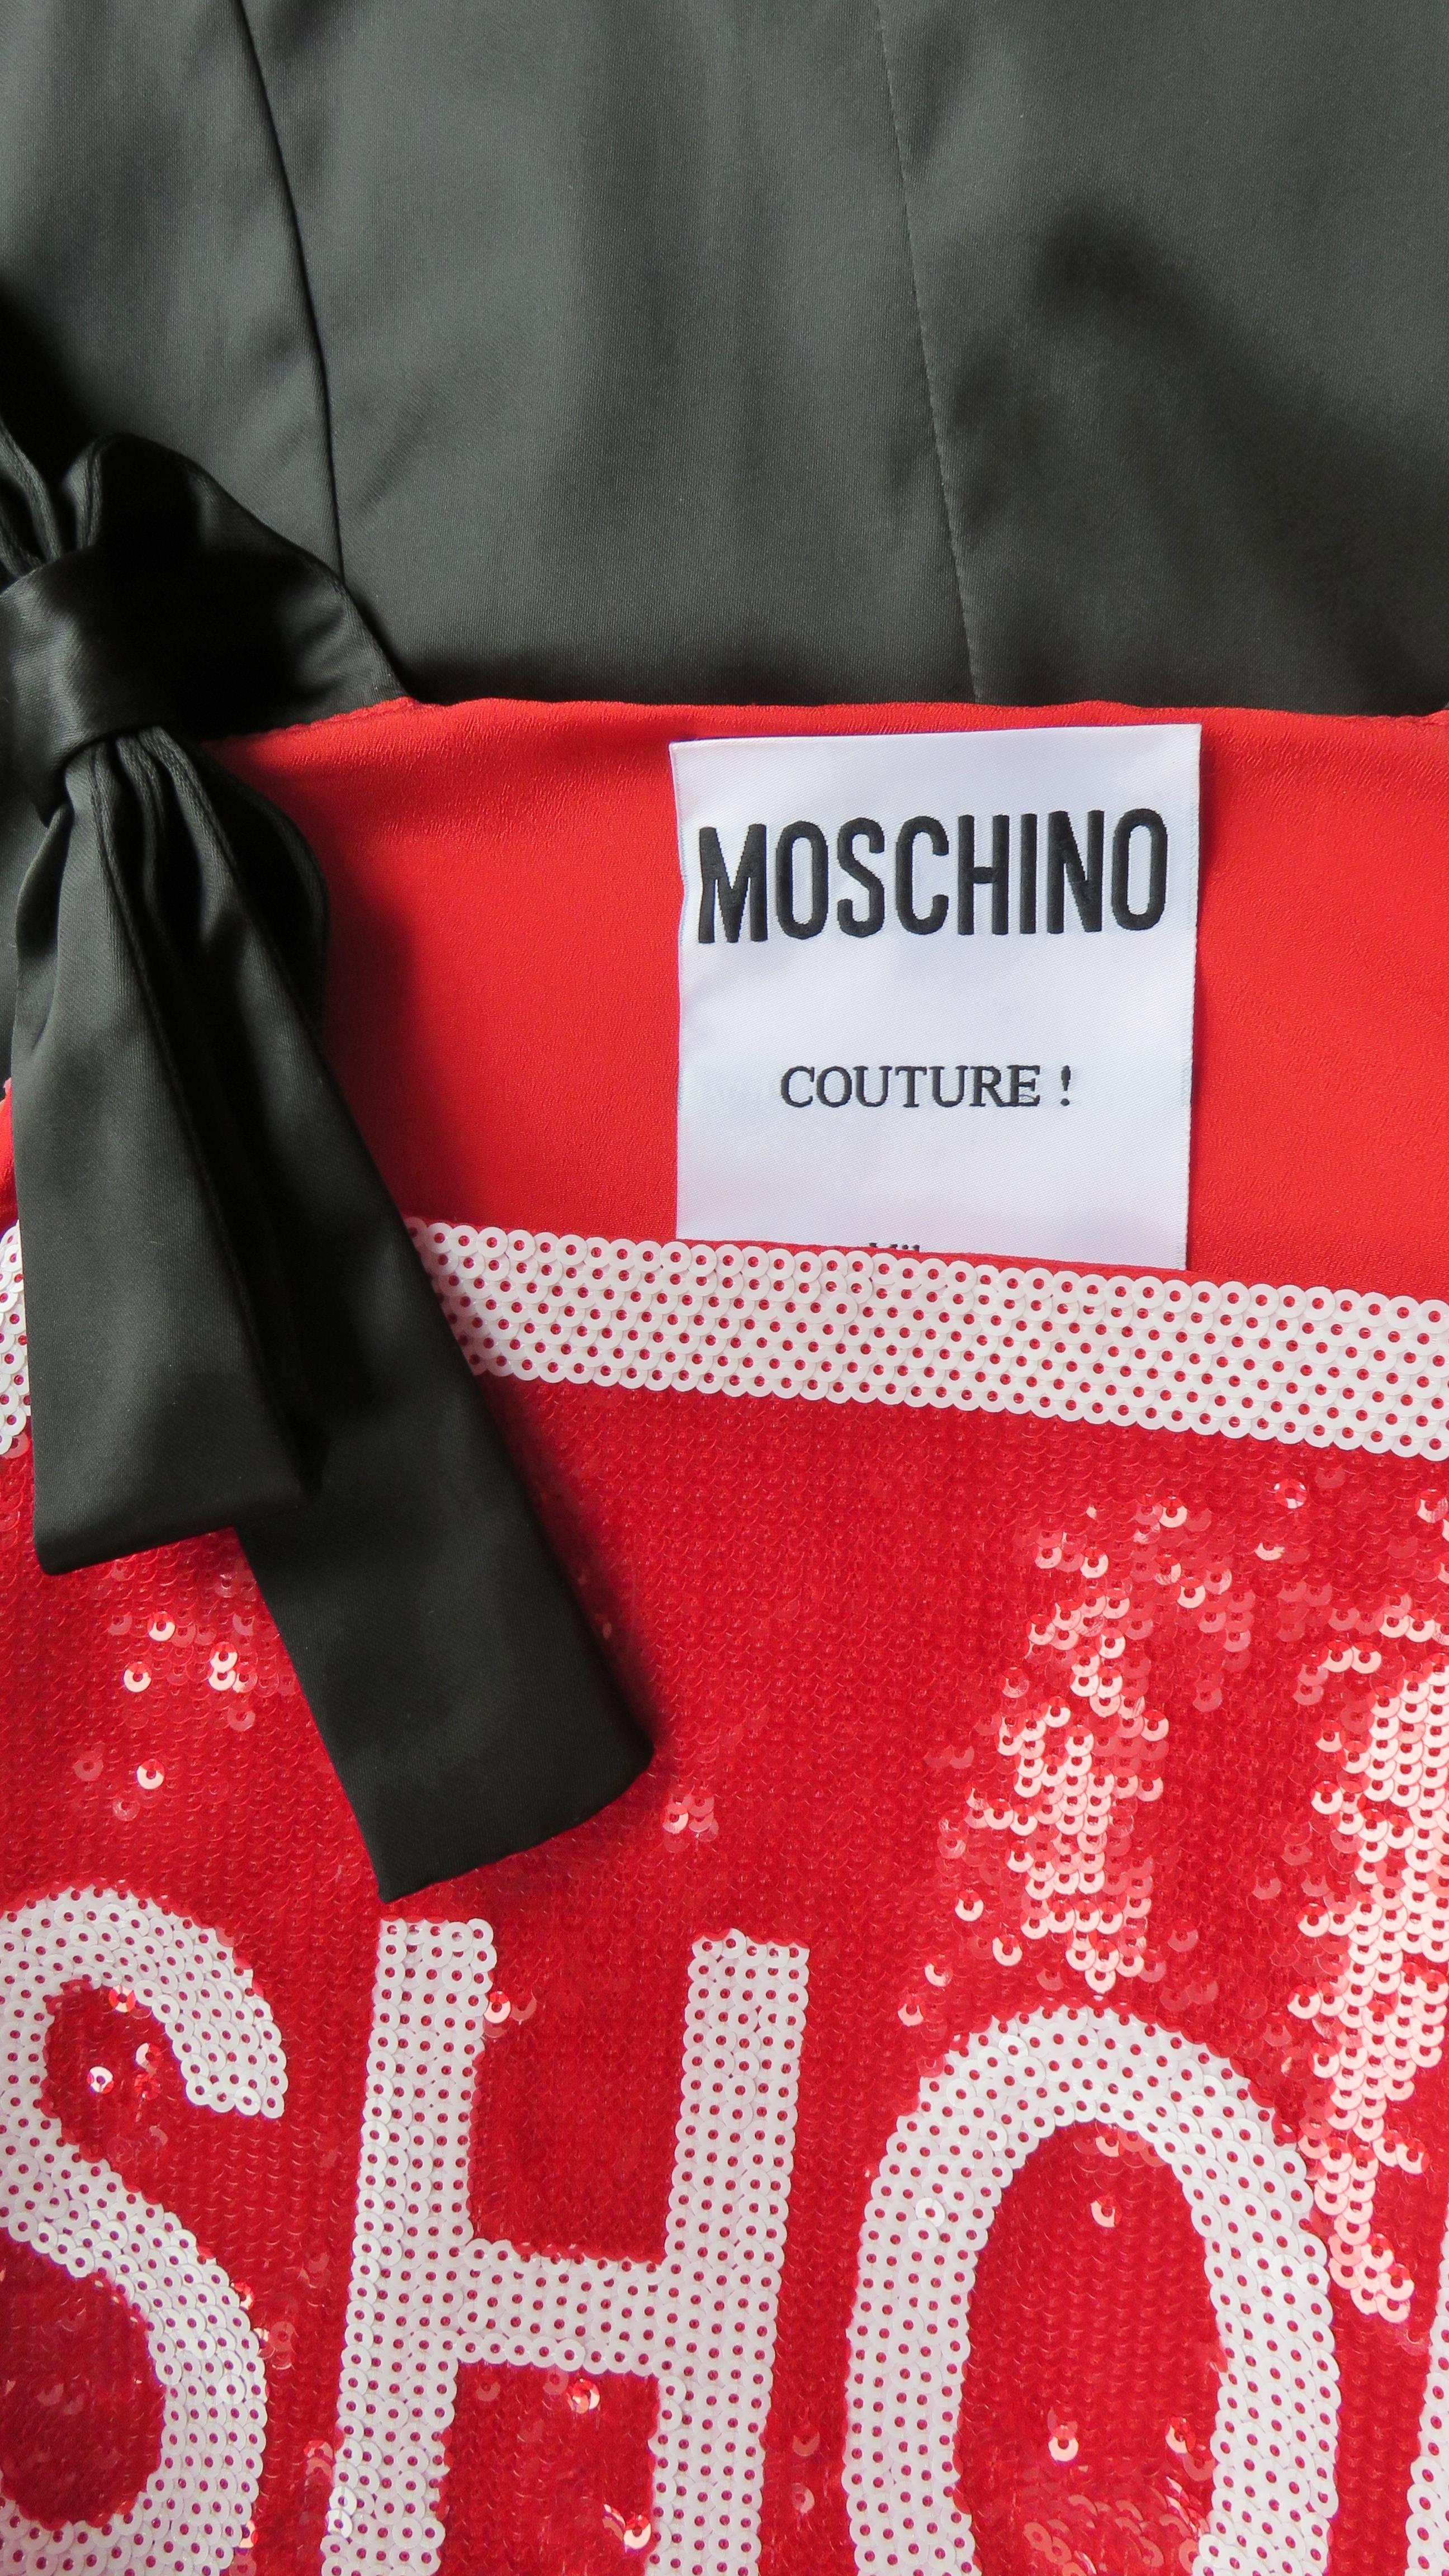 Moschino Couture Sequin SHOP Sign Dress  1